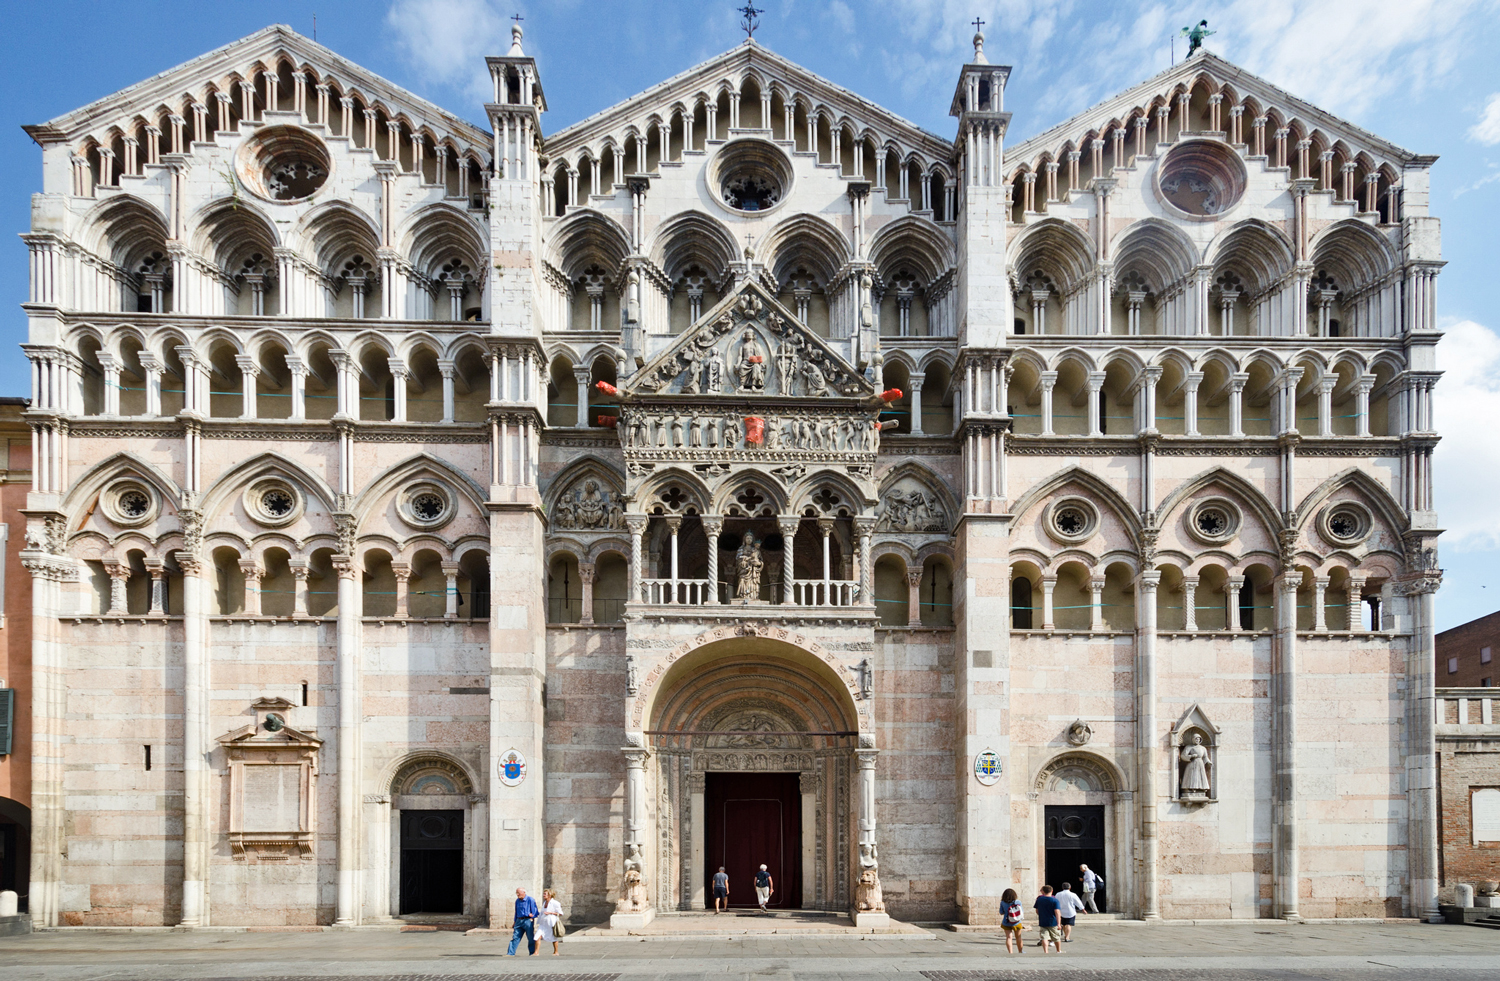 Ferrara in 3 minutes: Best Things to Do and See